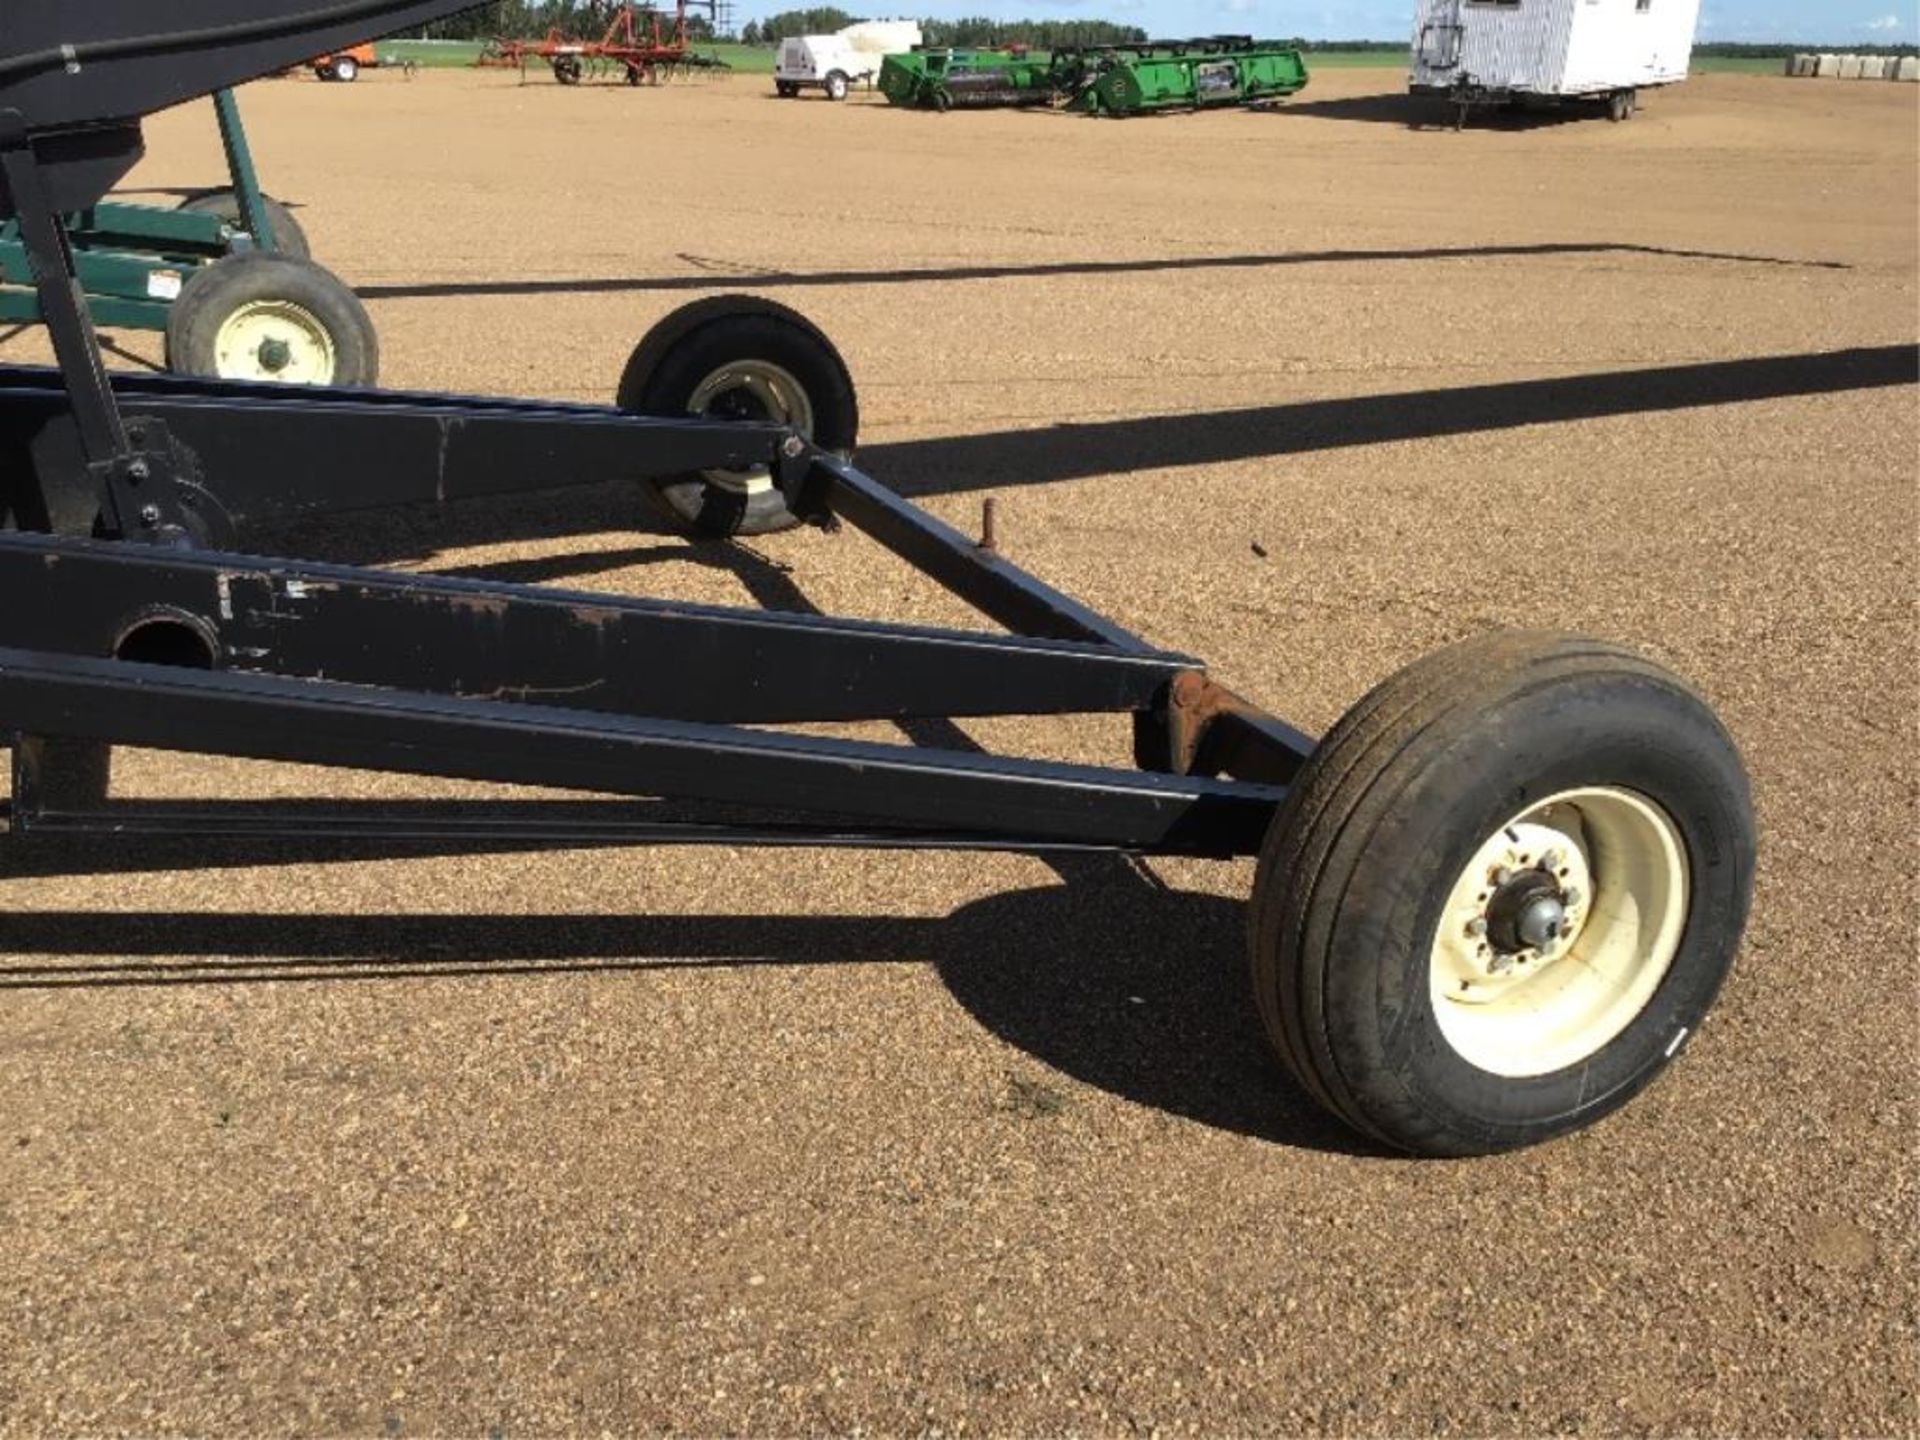 Convey All 14 X 65Ft PTO Drive Grain Conveyor s/n 7897874 540PTO, c/w Brand New Belt valued at $3, - Image 7 of 11